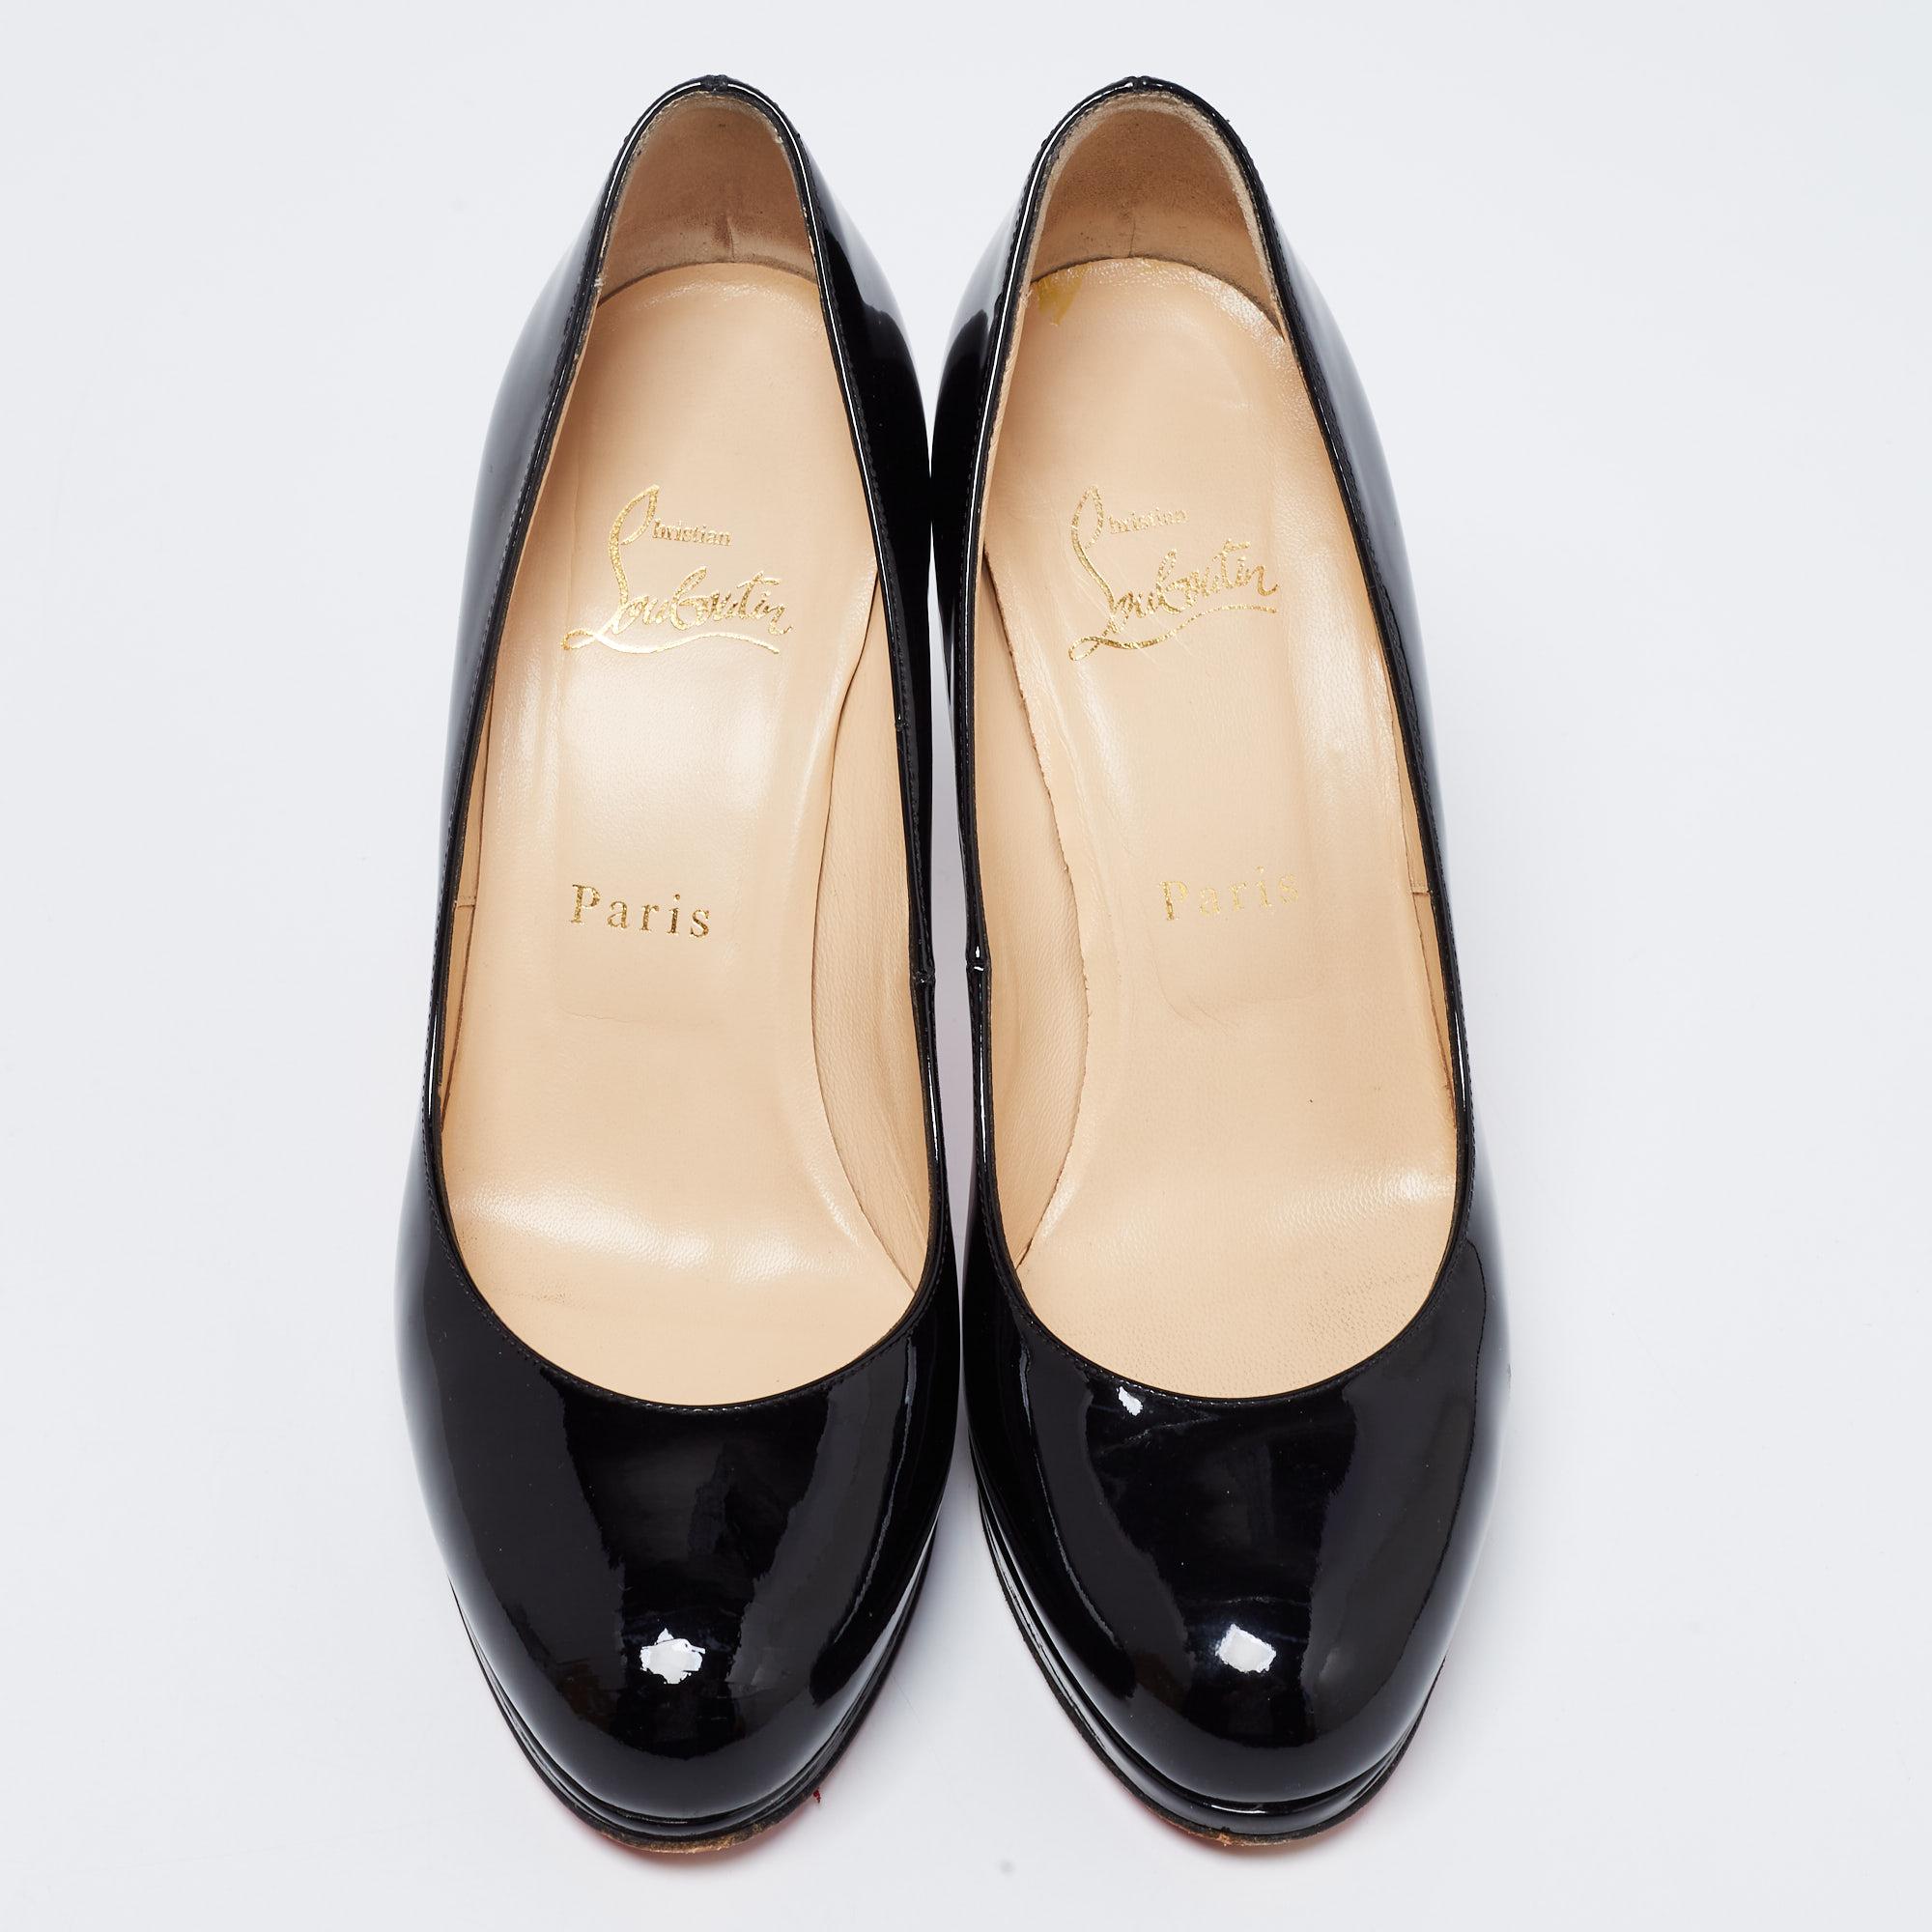 Escape the monotonous designs and move on to classy styles like these New Simple pumps from Christian Louboutin. They showcase a chic silhouette crafted from black patent leather. They are finished with rounded toes, platforms, and pointy 10 cm